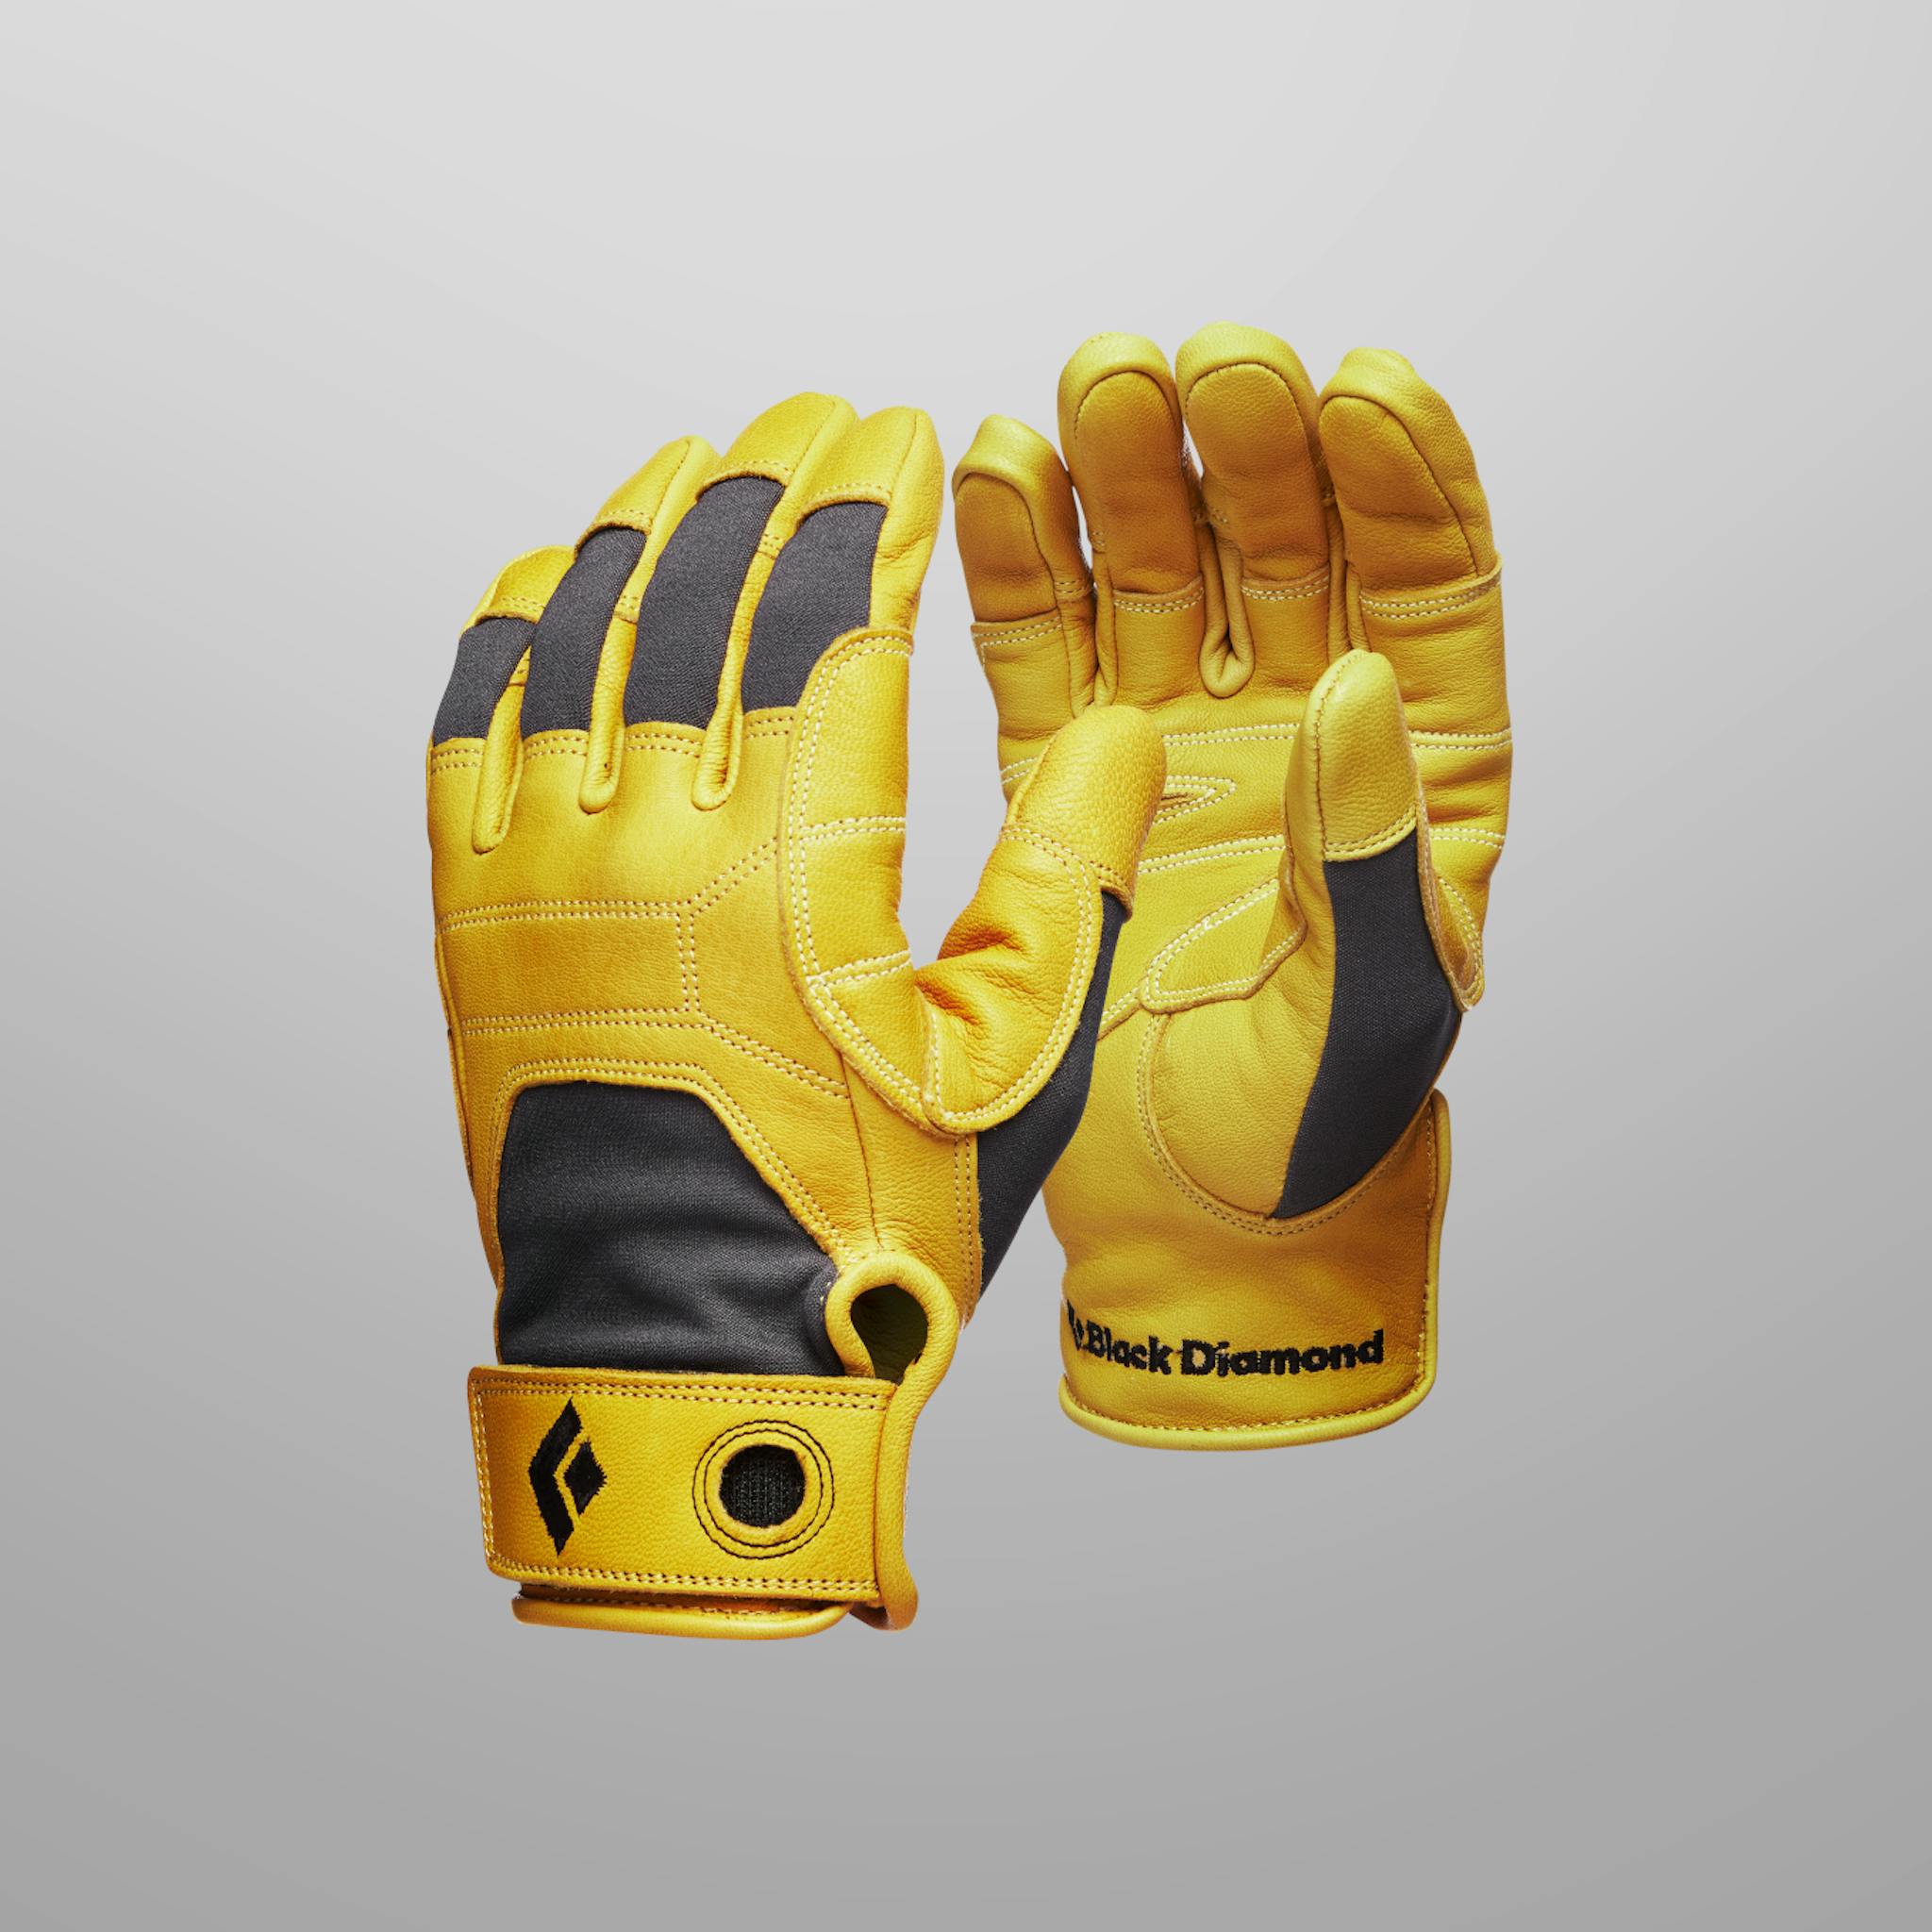 Glam shot of the Transition climbing gloves